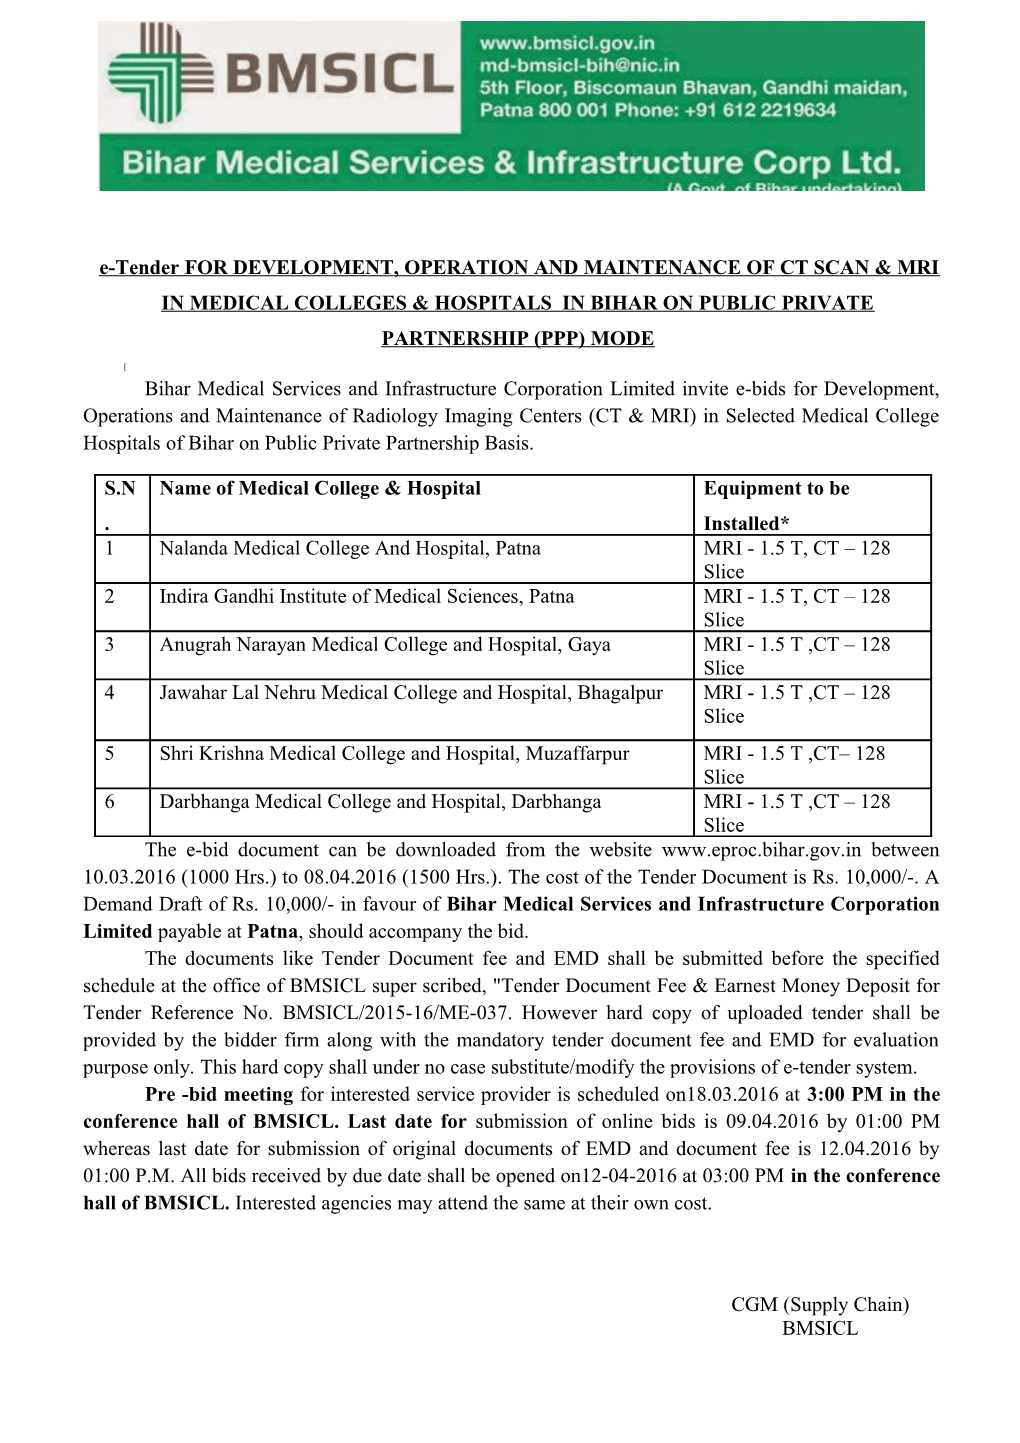 E-Bidding Document for Setting up CT & MRI at Govt.Medical Colleges & Hospitals of Bihar